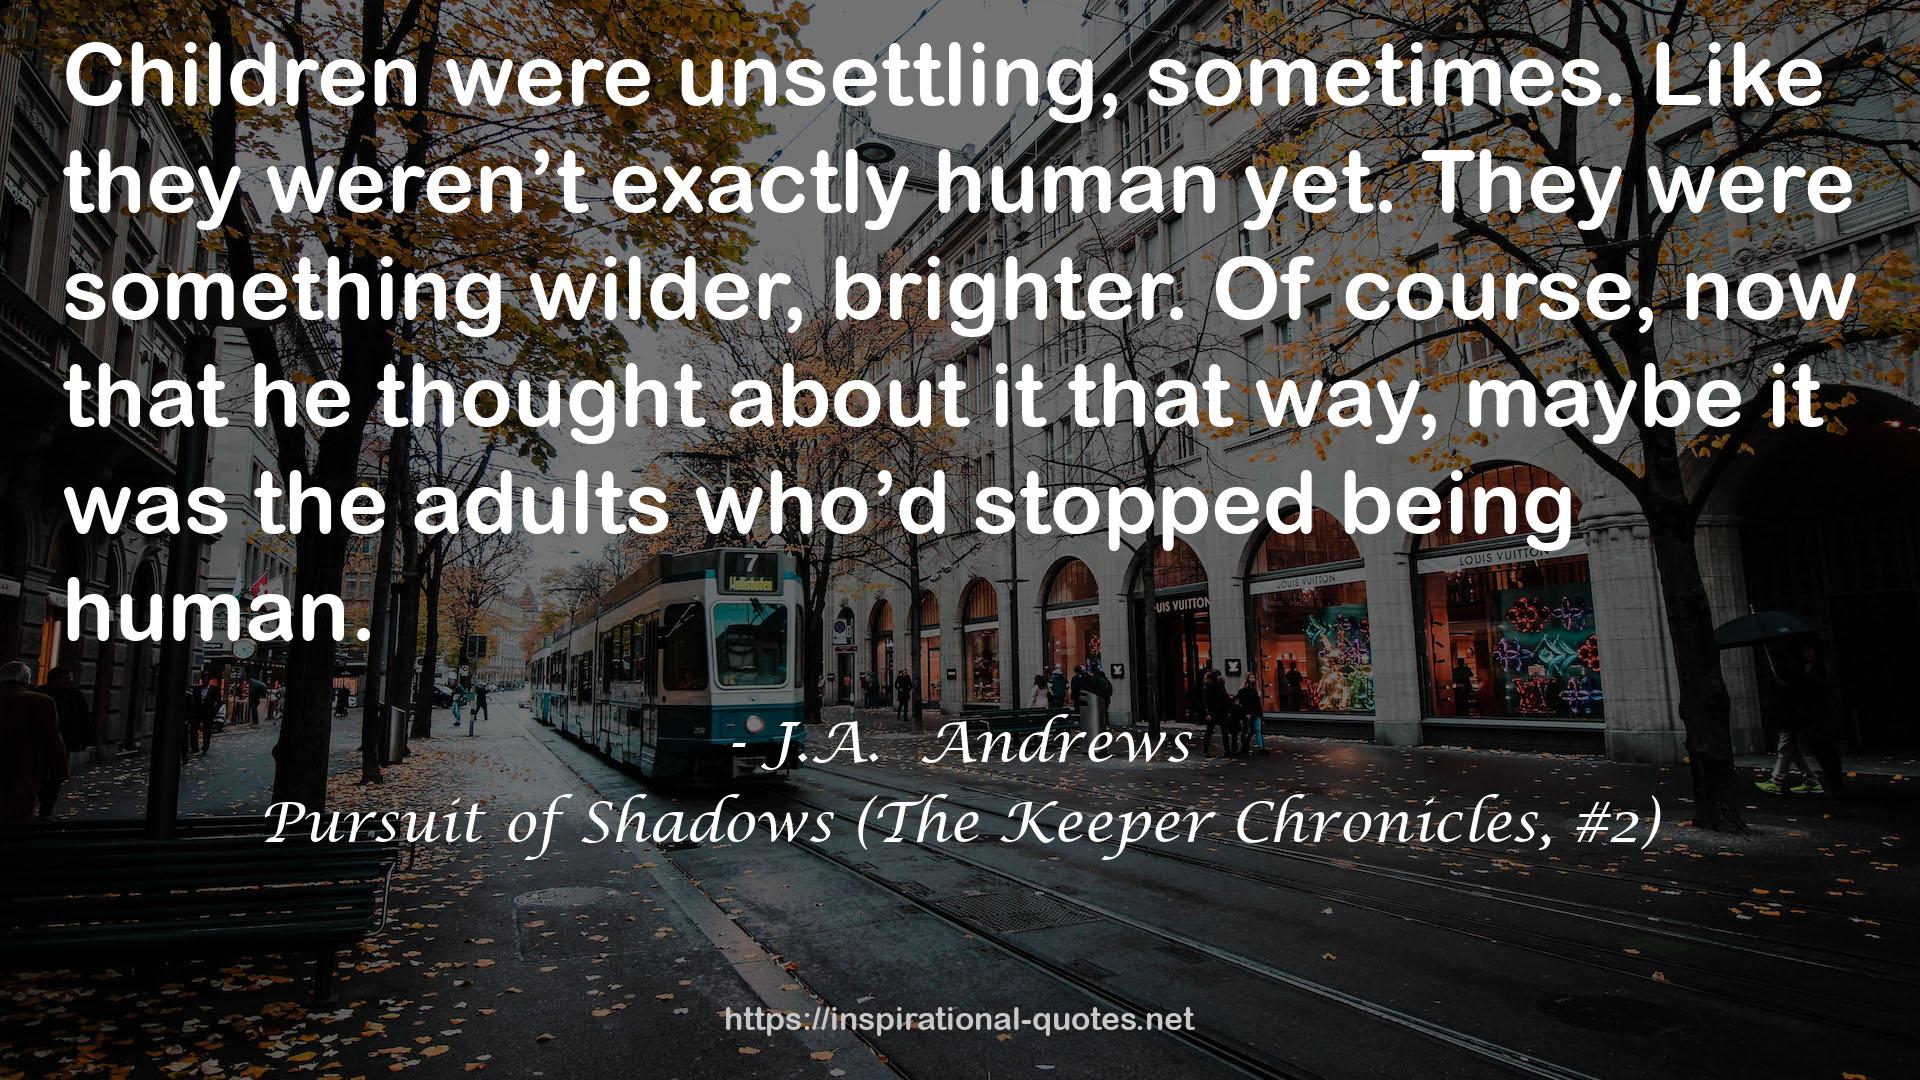 Pursuit of Shadows (The Keeper Chronicles, #2) QUOTES